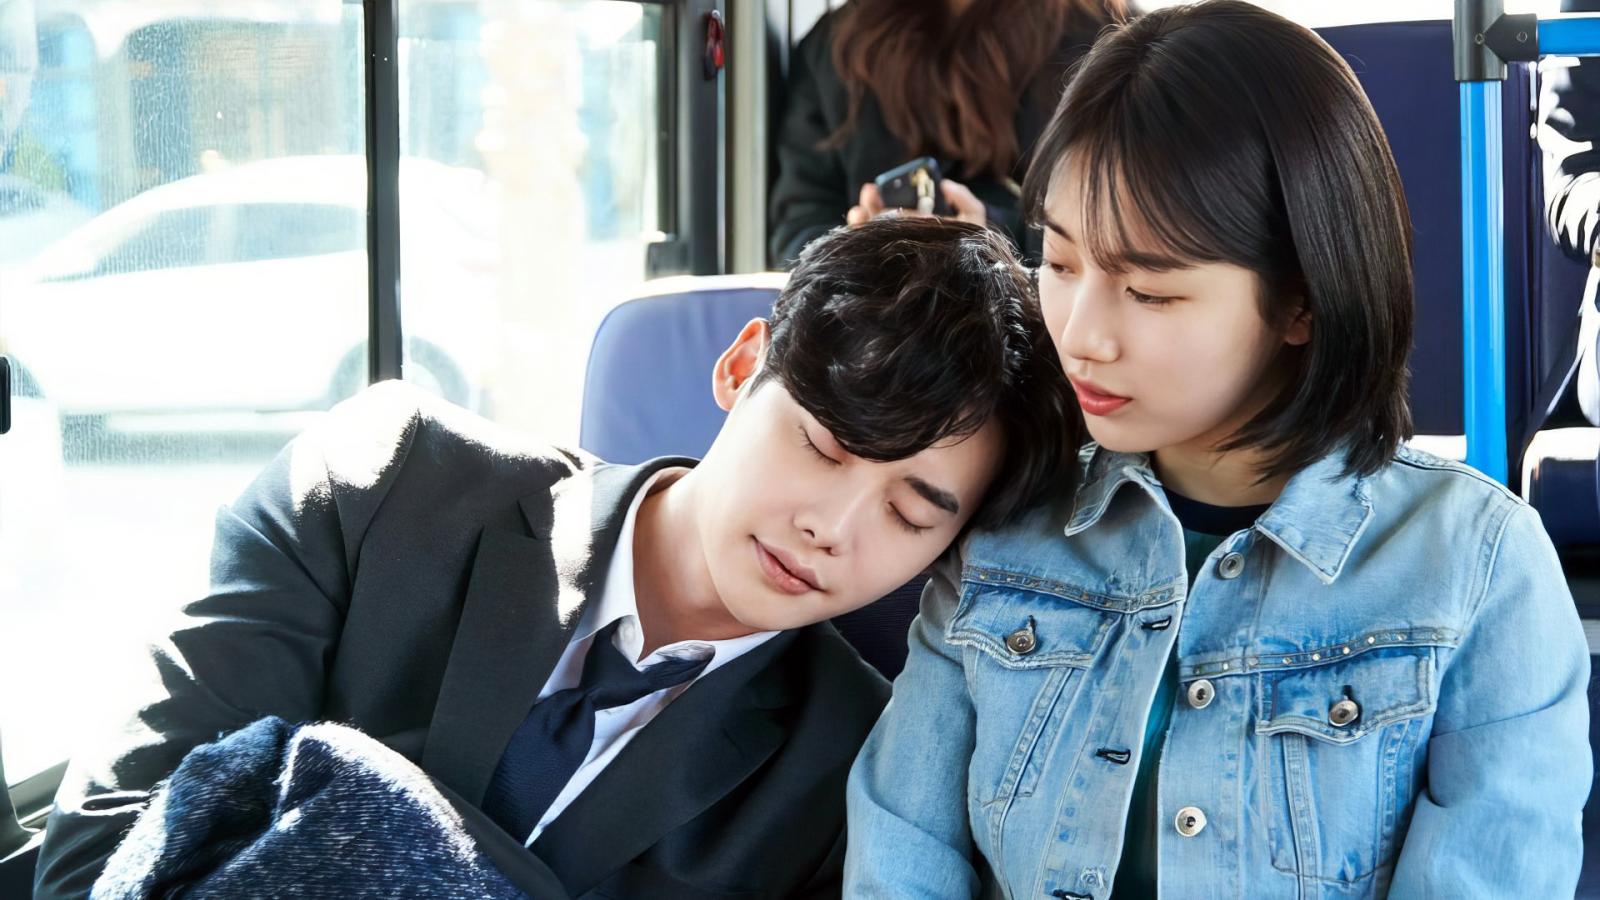 We Asked AI for 10 K-Dramas with the Best Plot Twists - And It Delivered - image 4